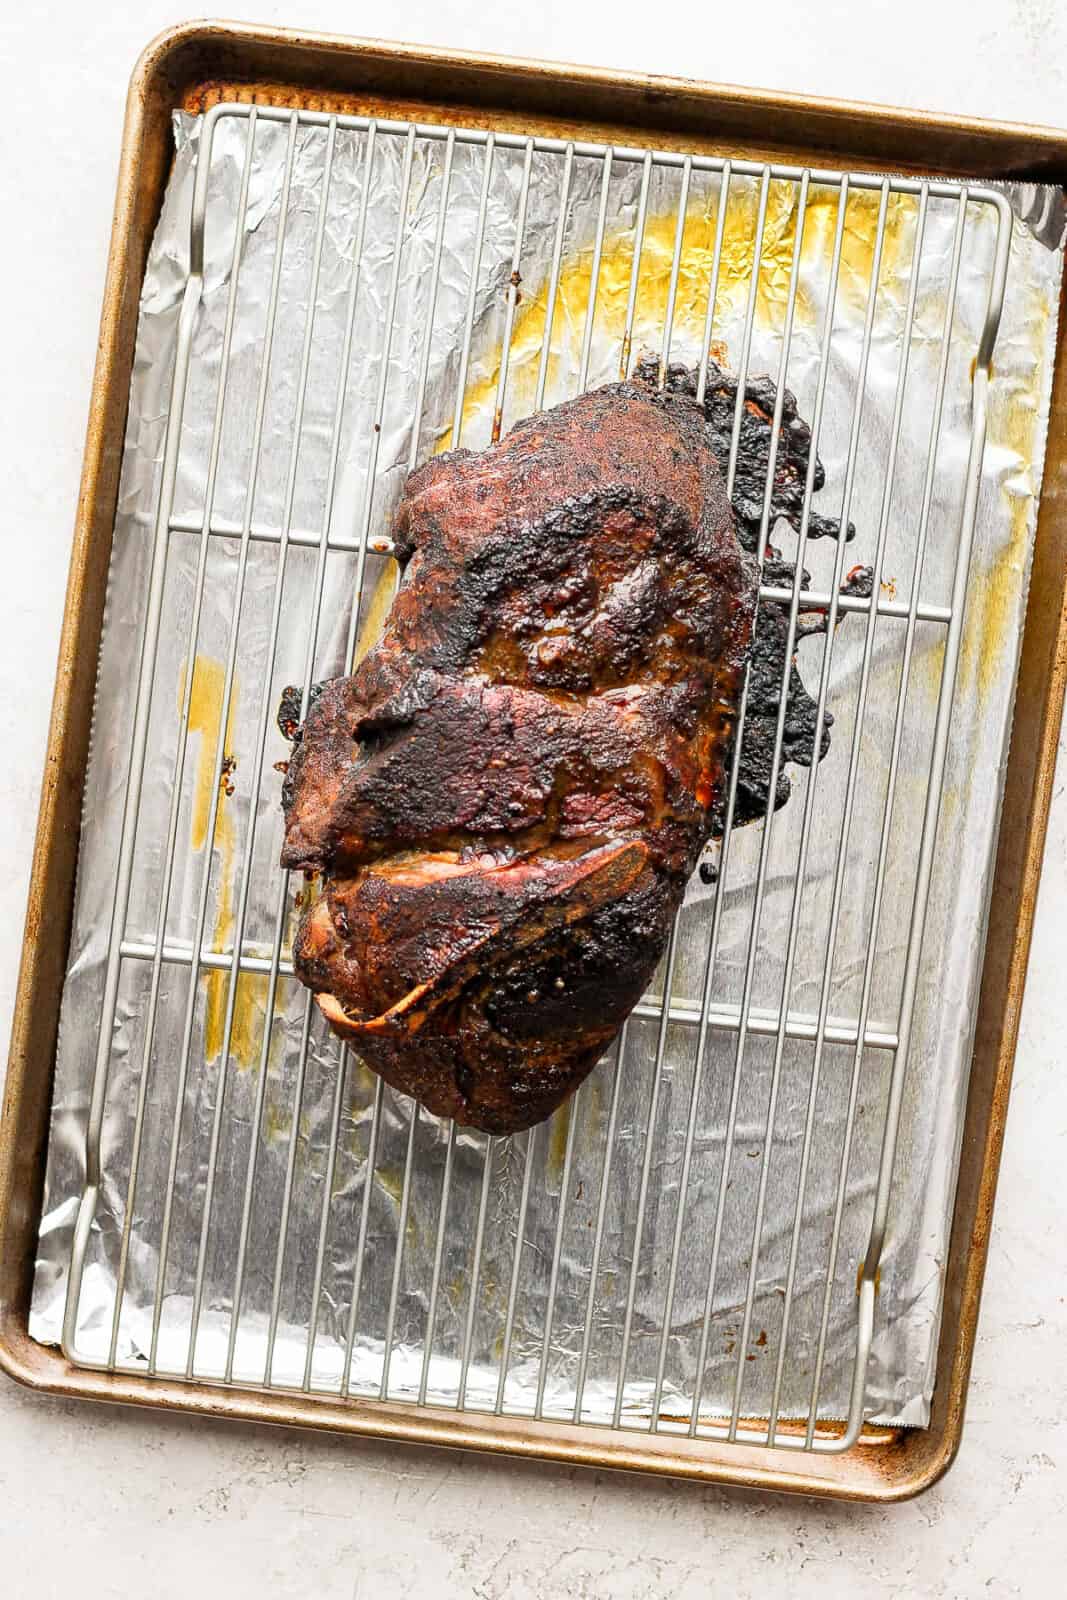 A pork shoulder roast on a wire rack which is on a foil-lined baking sheet.